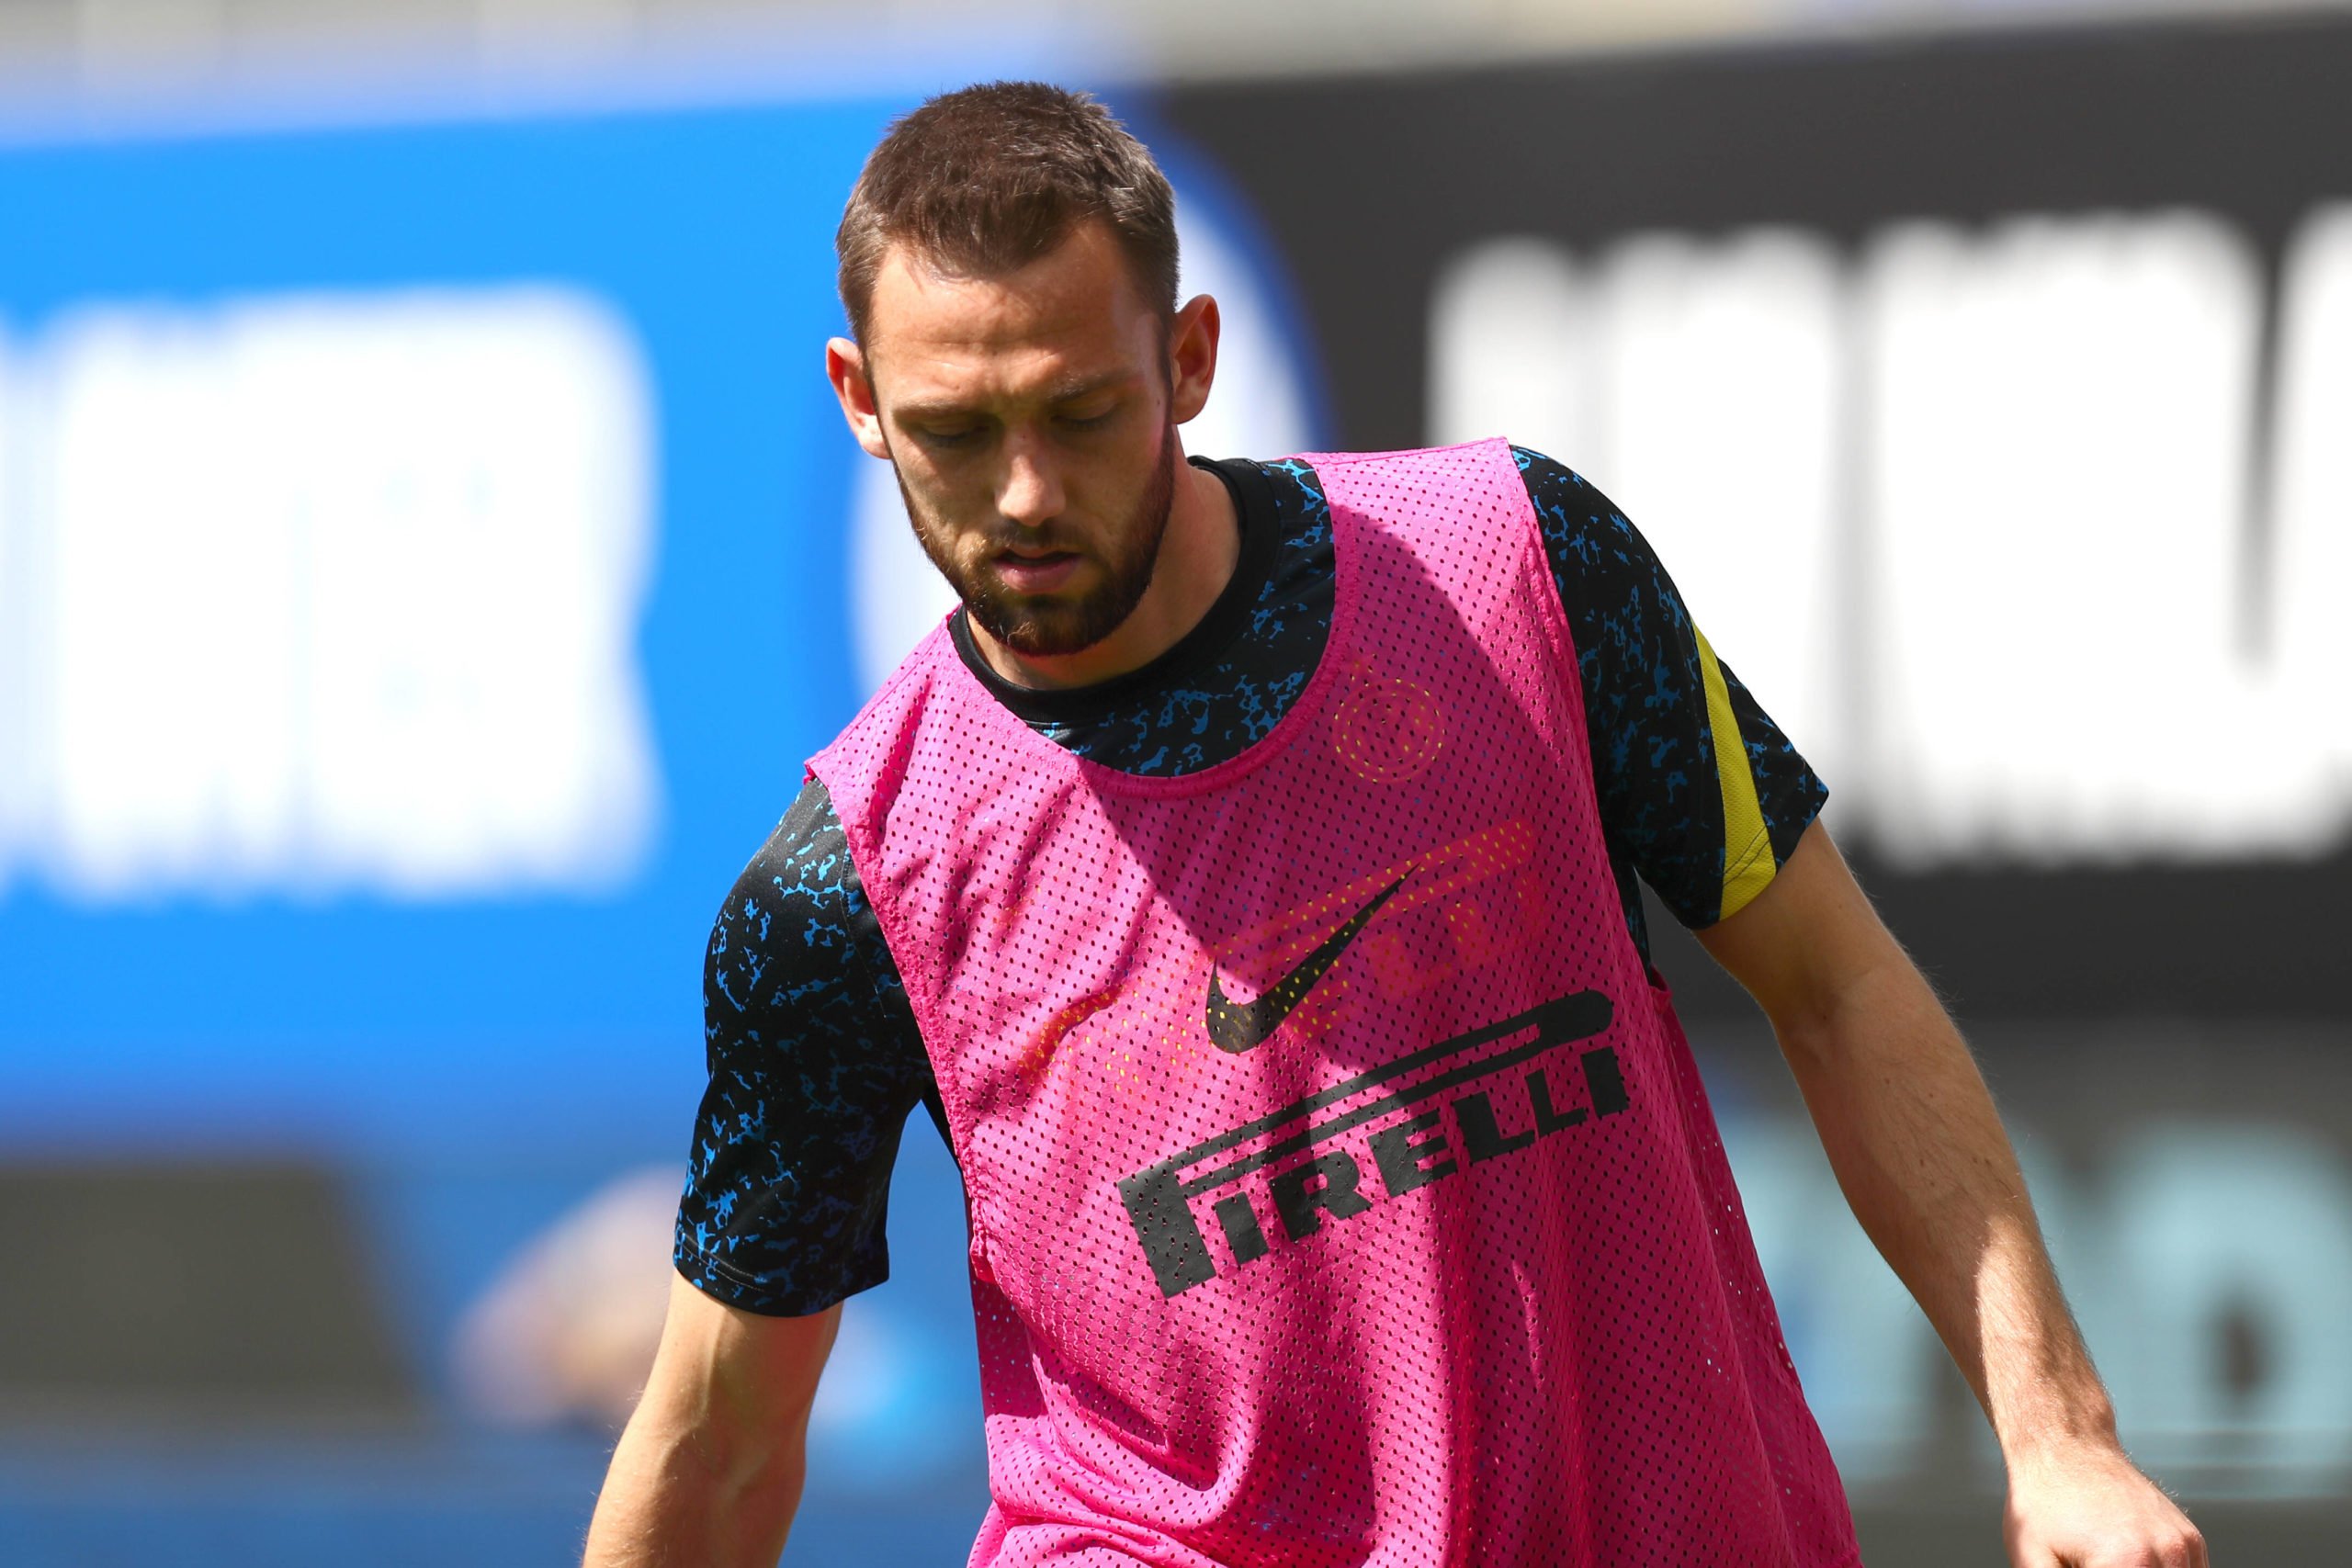 Everton set their sights on Stefan de Vrij who is seen in the picture